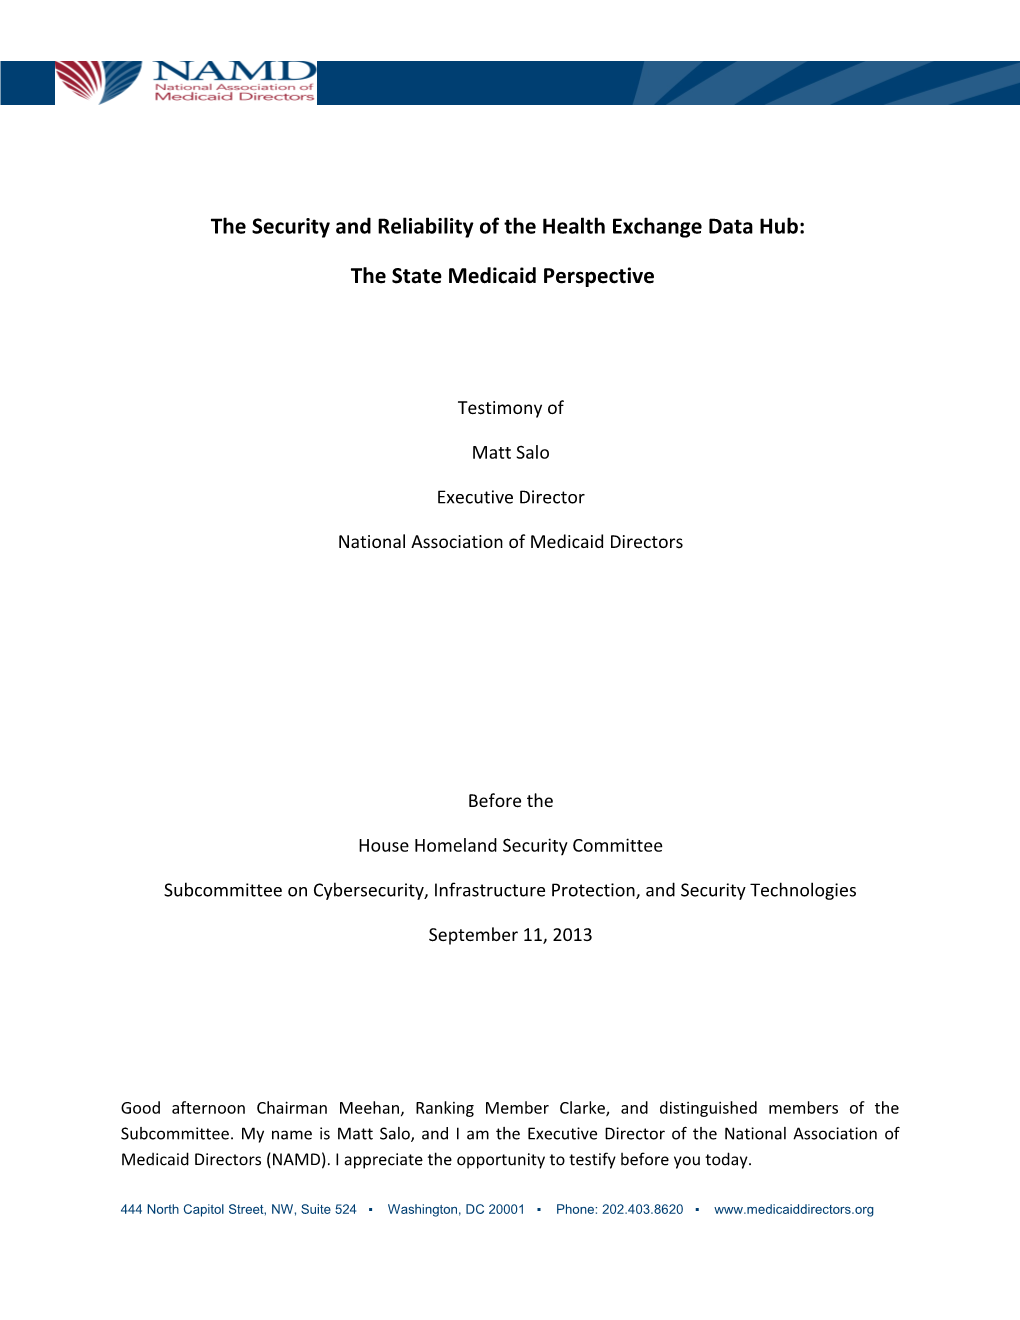 The Security and Reliability of the Health Exchange Data Hub